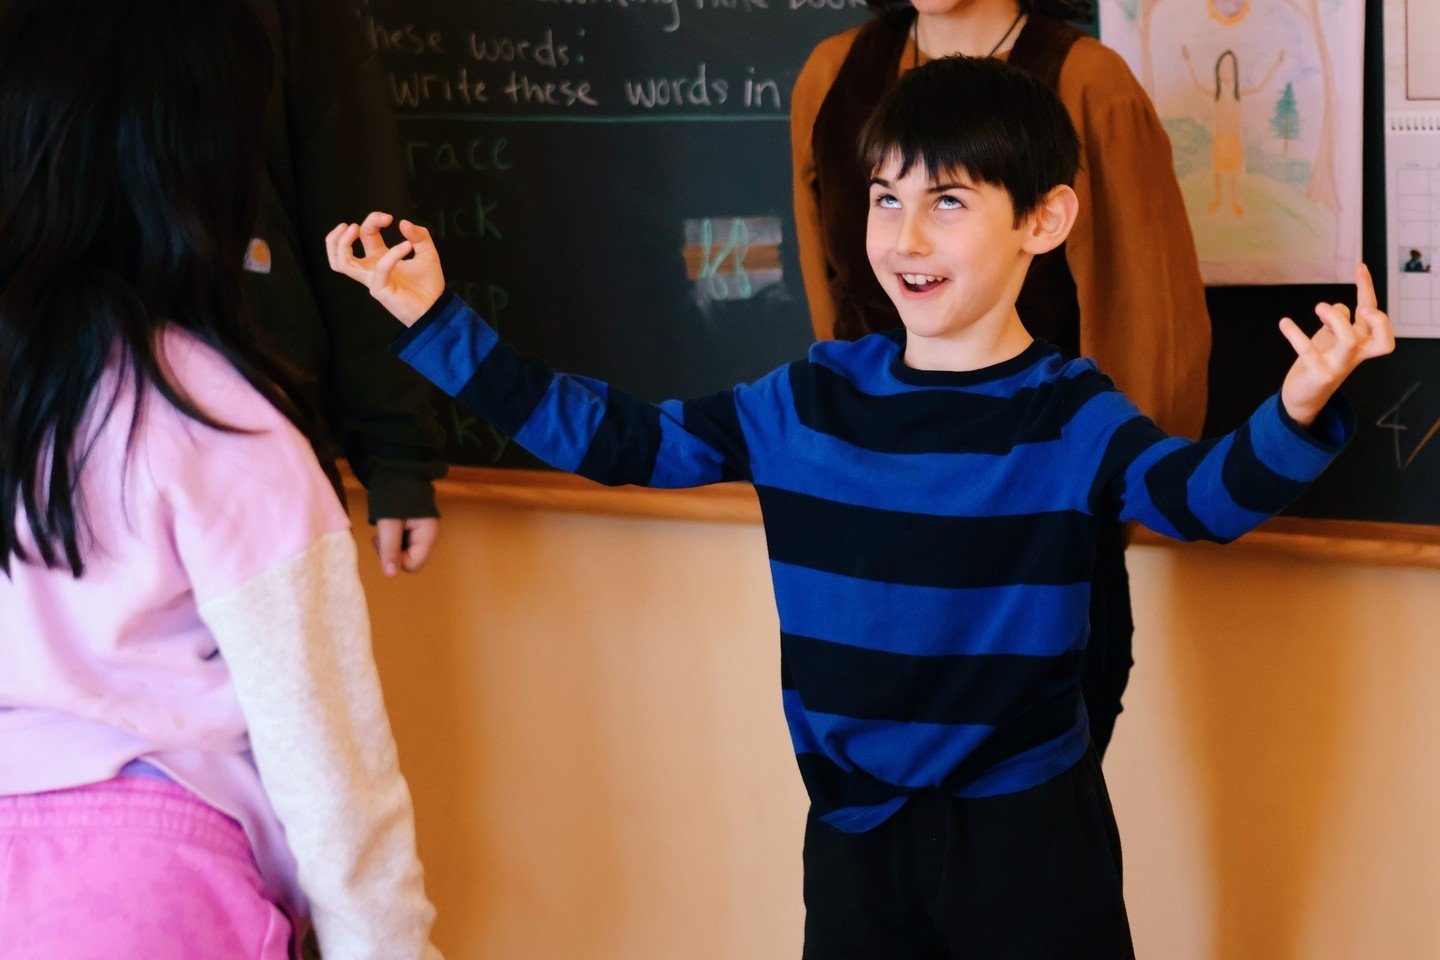 It's Theater Block season at IWS! The &quot;play block&quot; is eagerly anticipated in every grades classroom. Here you see our 2nd and 3rd graders playing theater games taught to them by their 8th grade buddies.⁠
⁠
Our first graders are writing thei